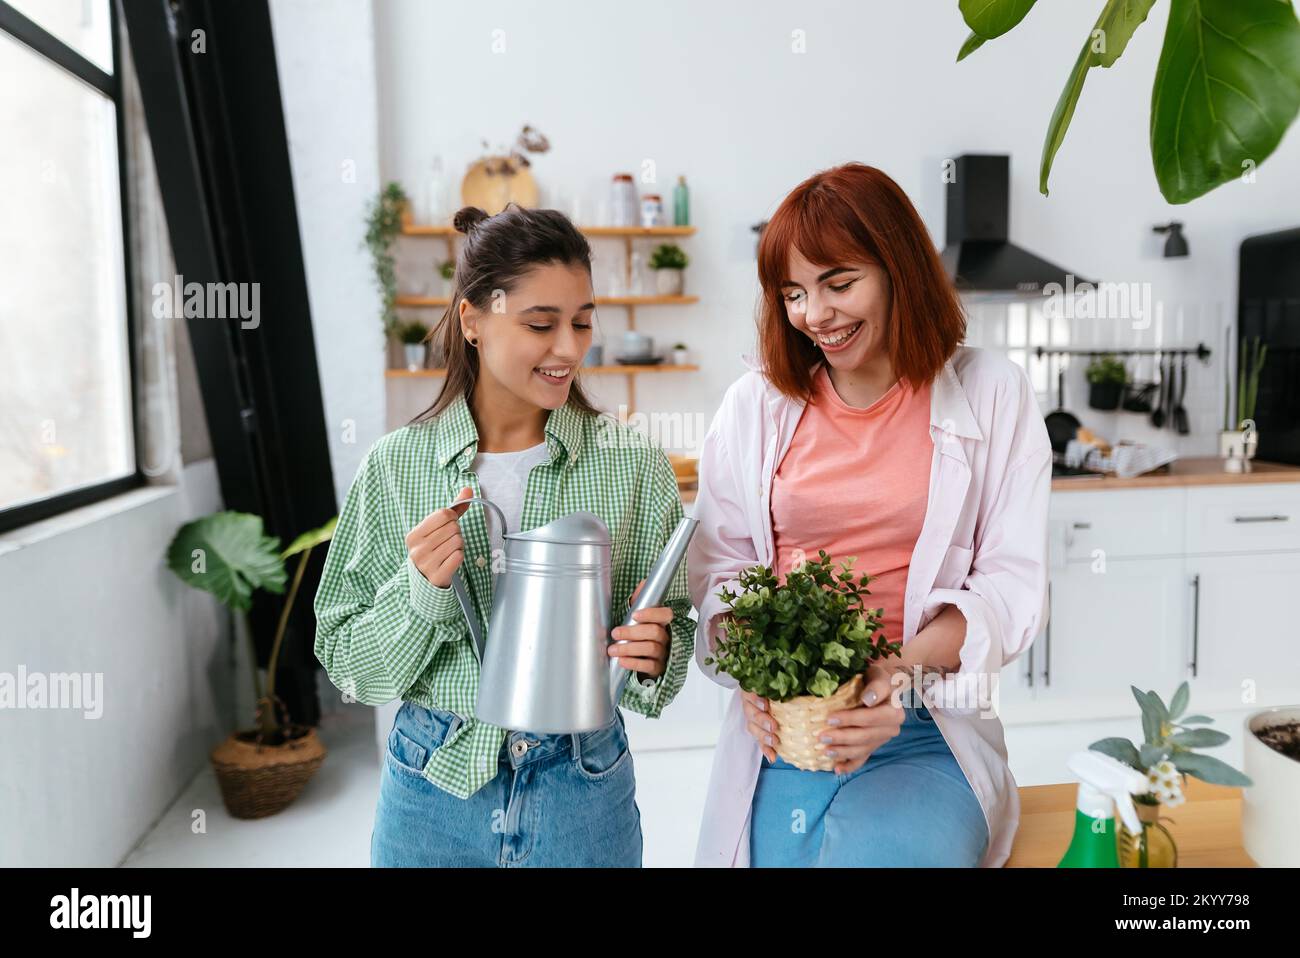 Women with a watering can and a houseplant Stock Photo